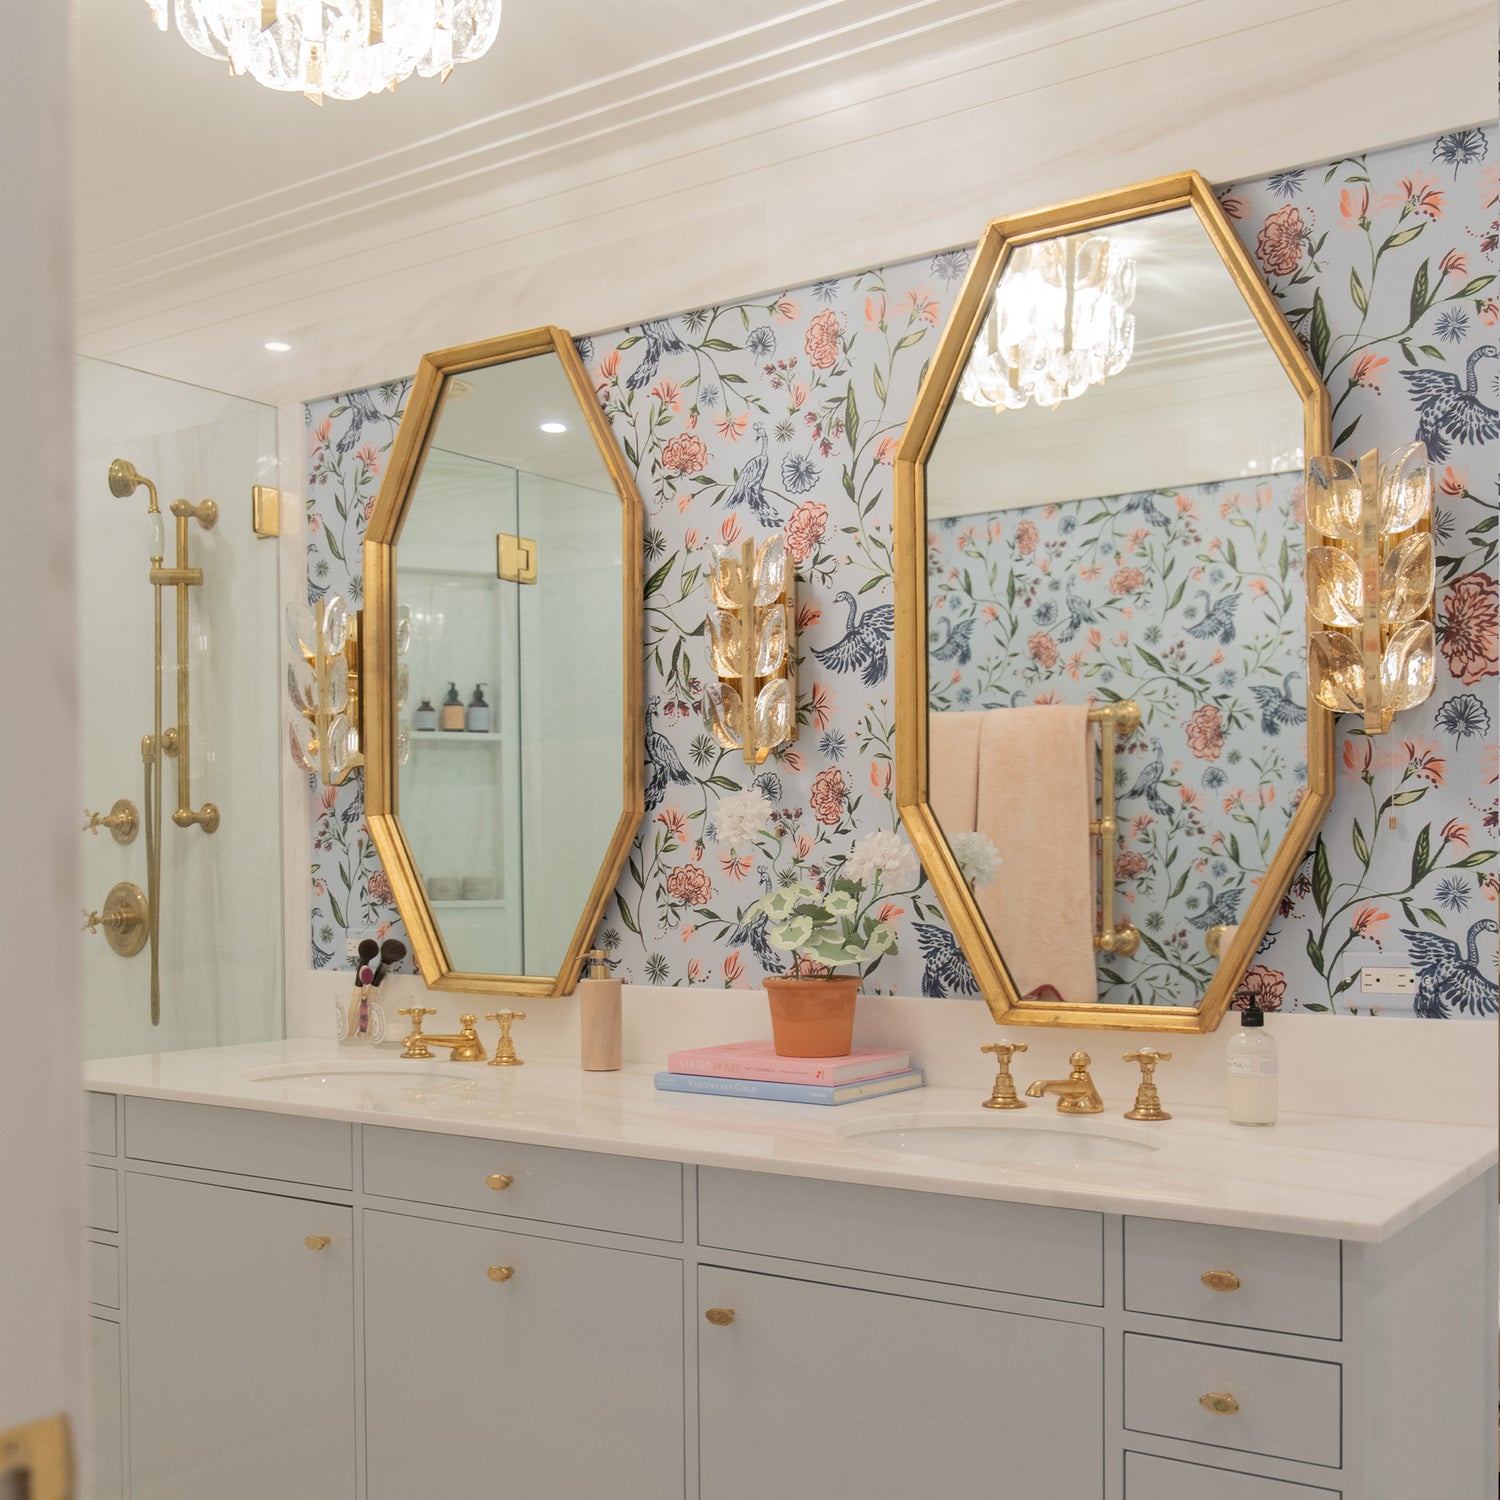 Illuminated bathroom styled with Blue Chinoiserie Printed wallpaper with two gold framed mirrors on top of two white sinks.